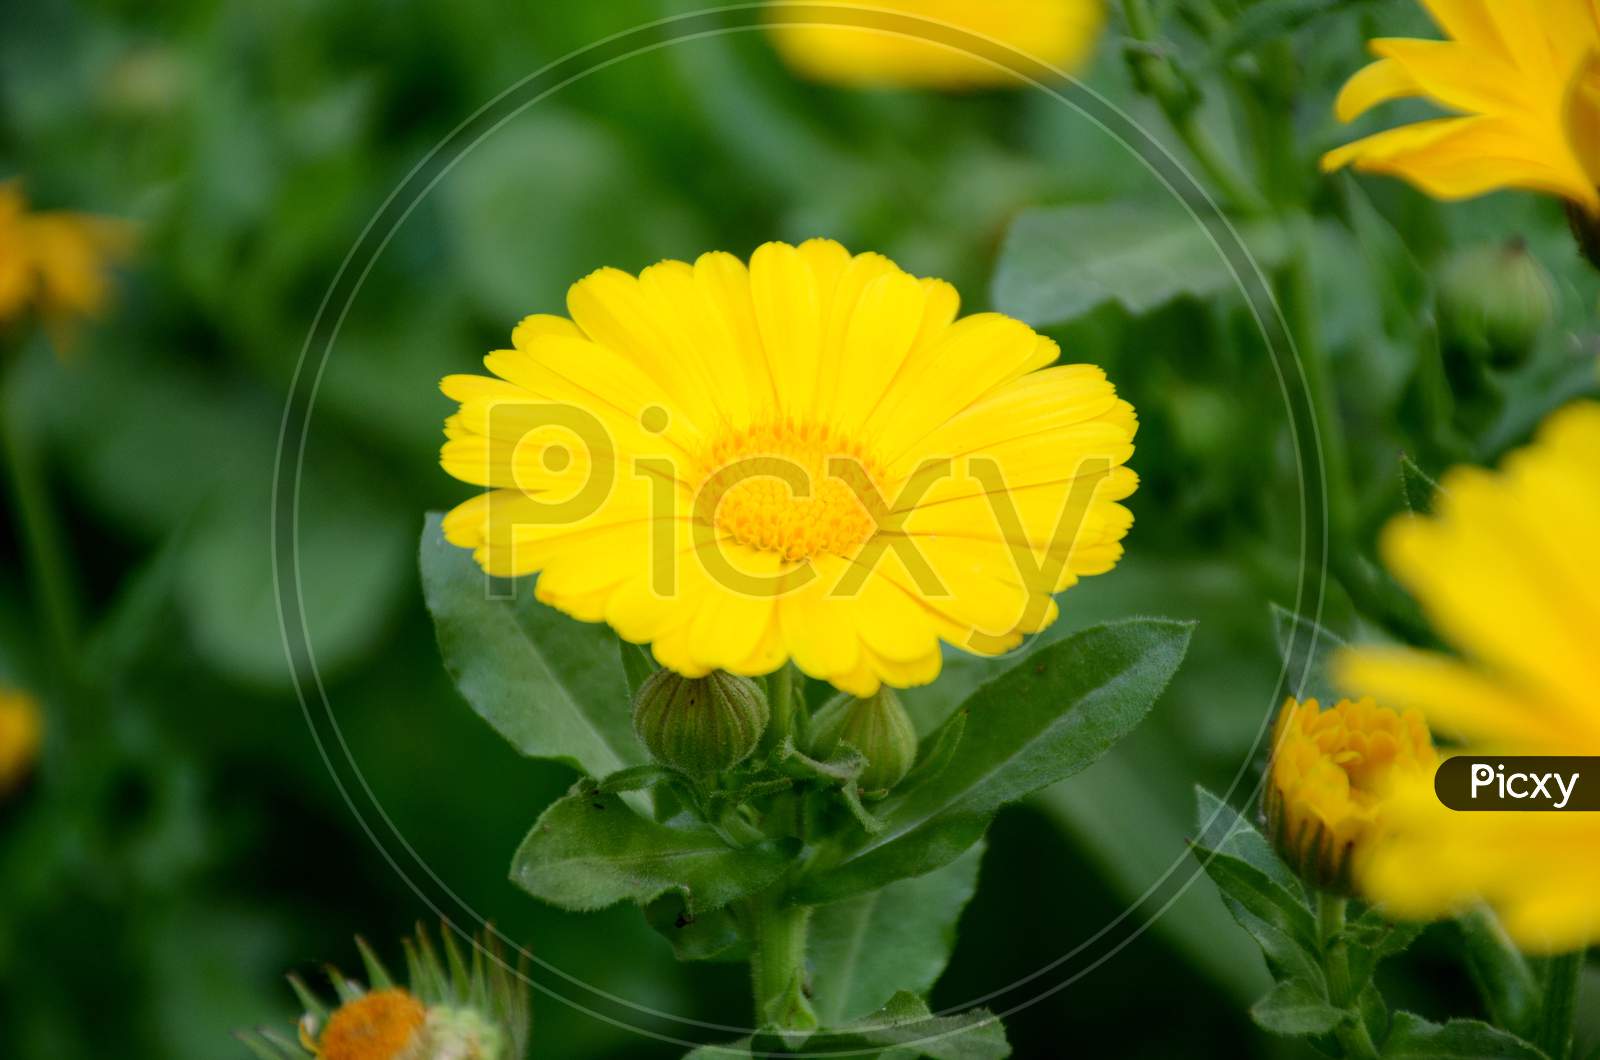 The Beautiful Calendula Yellow Flower With Leaves And Plant In The Garden.